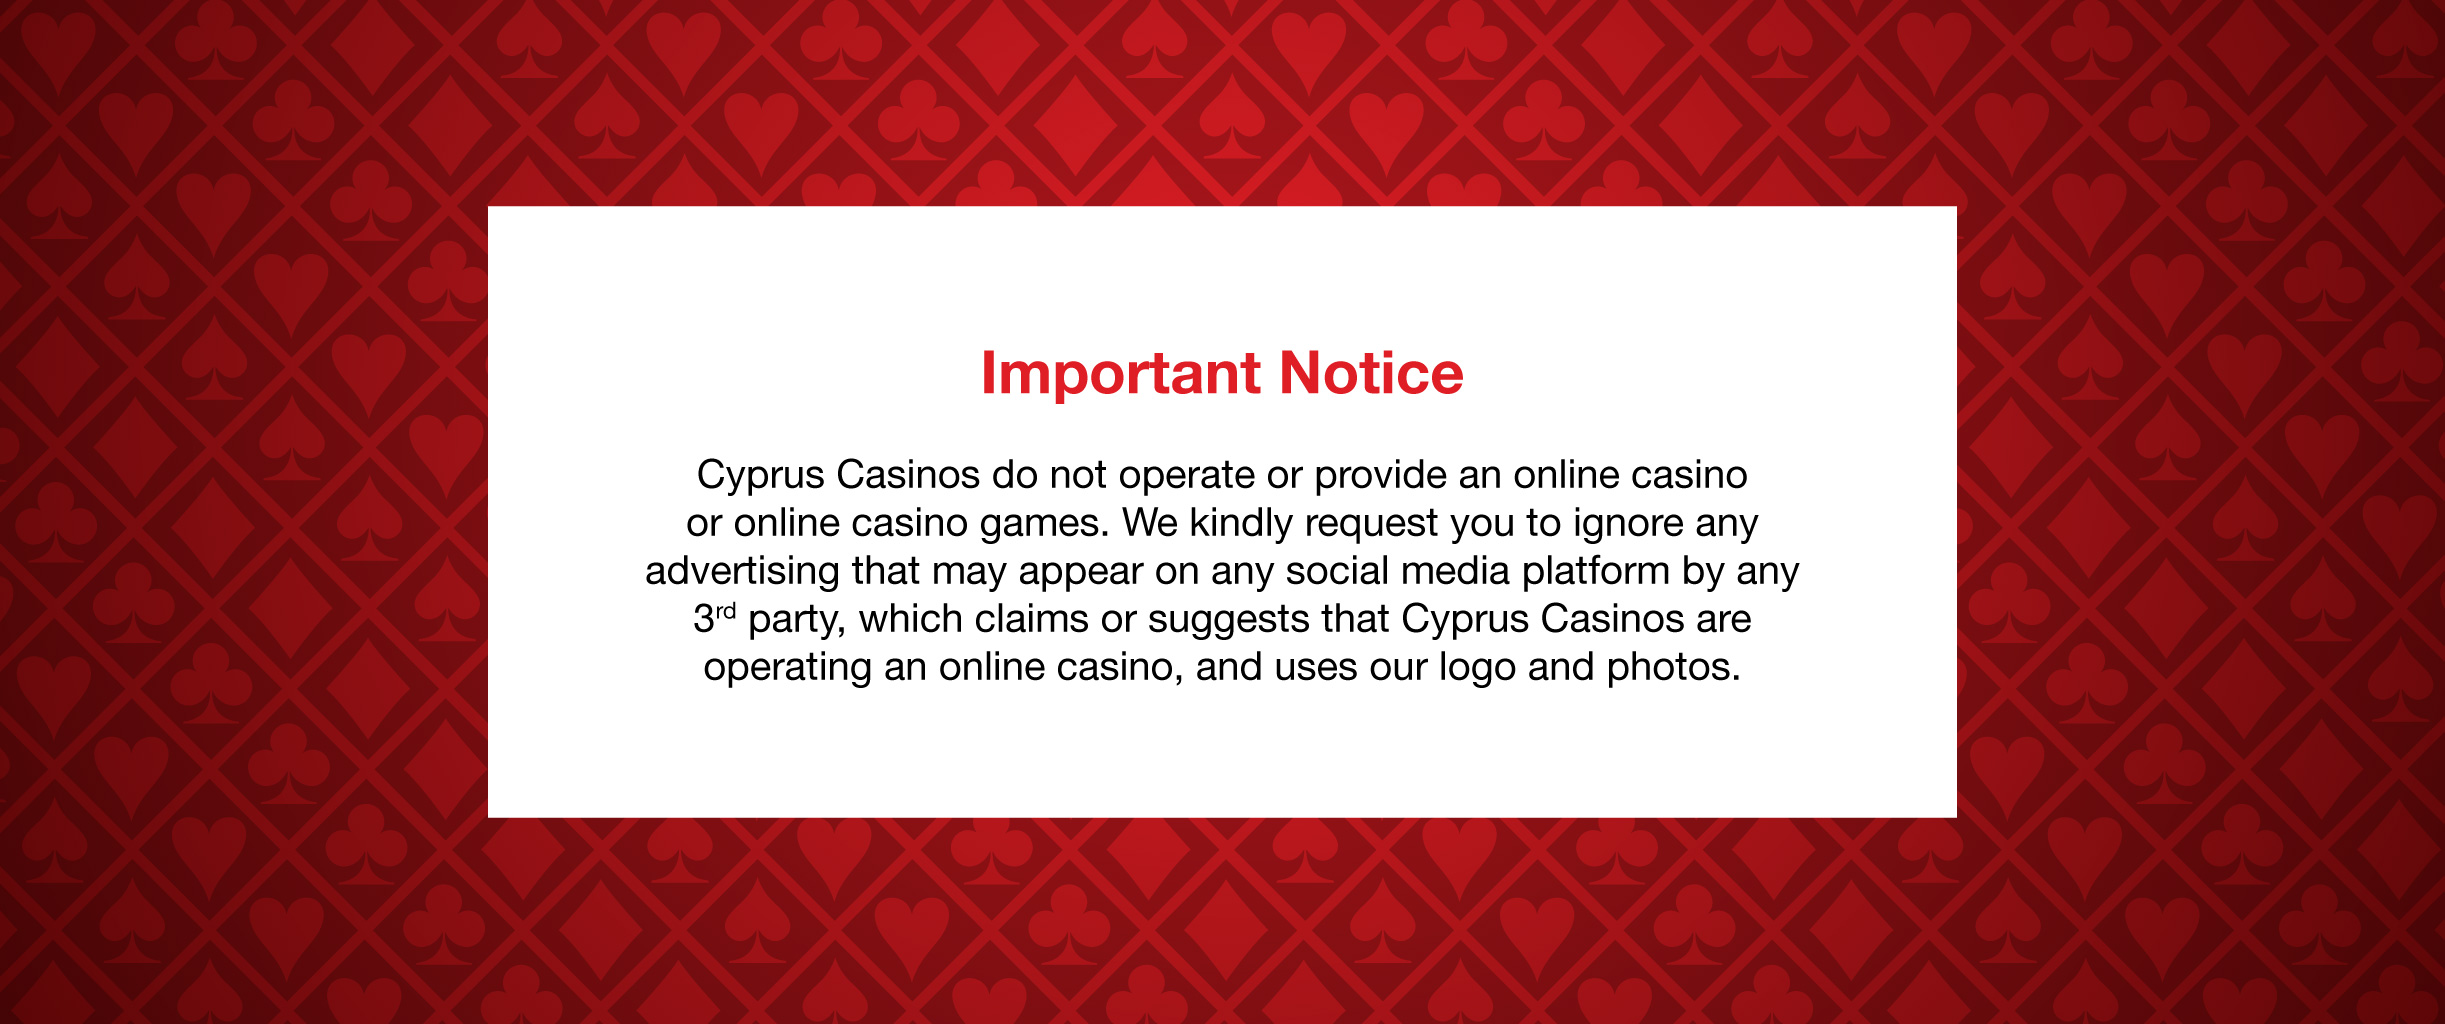 Where Can You Find Free online casinos Cyprus Resources